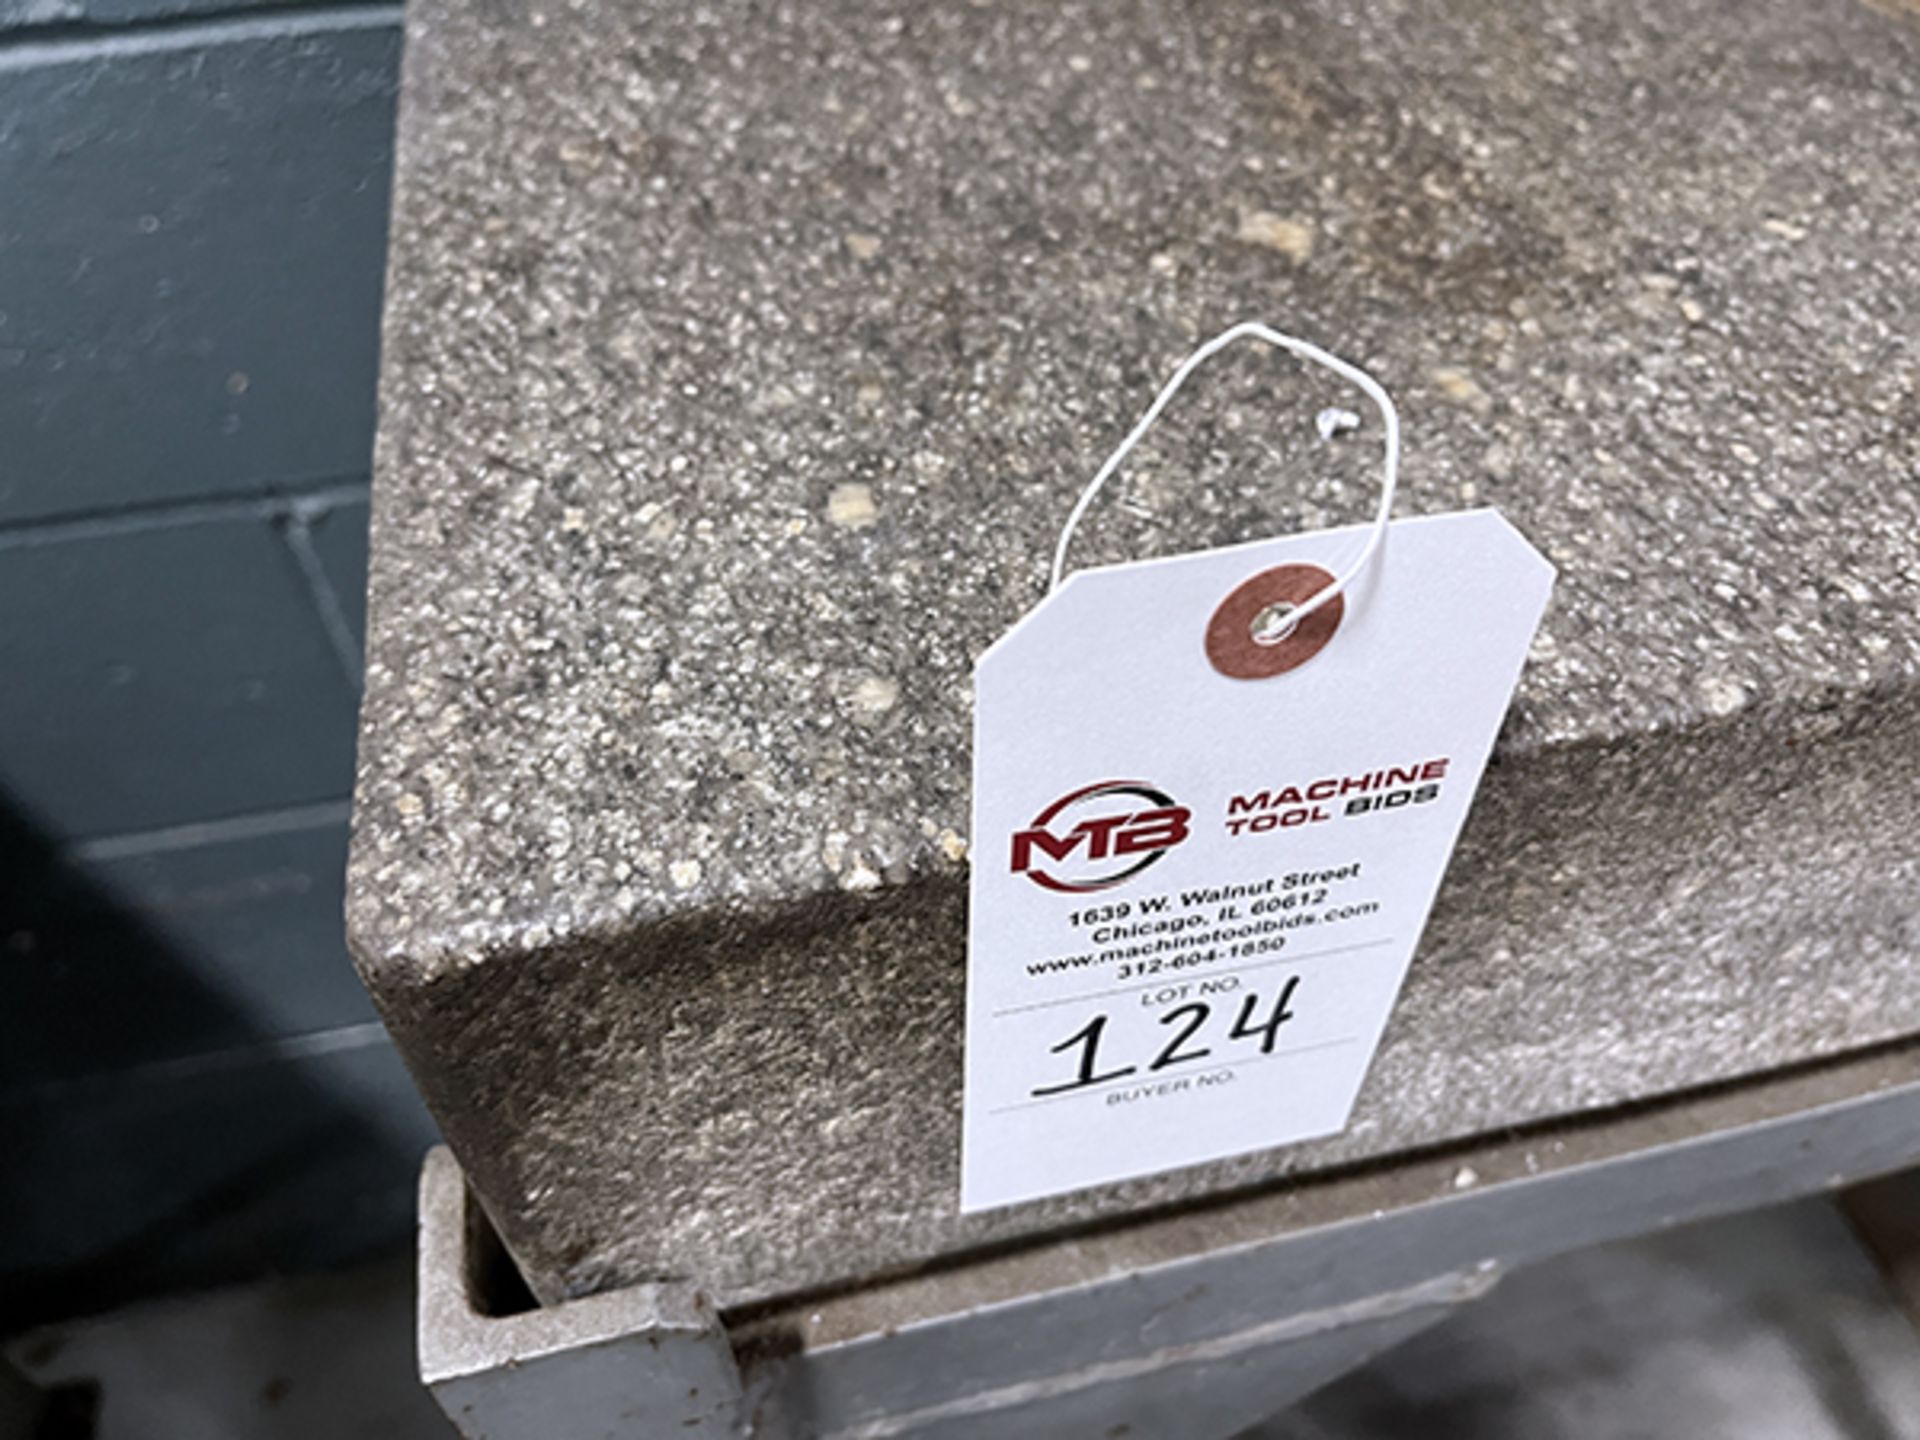 23 3/4" x 18" x 4" Granite Surface Plate - Image 4 of 4